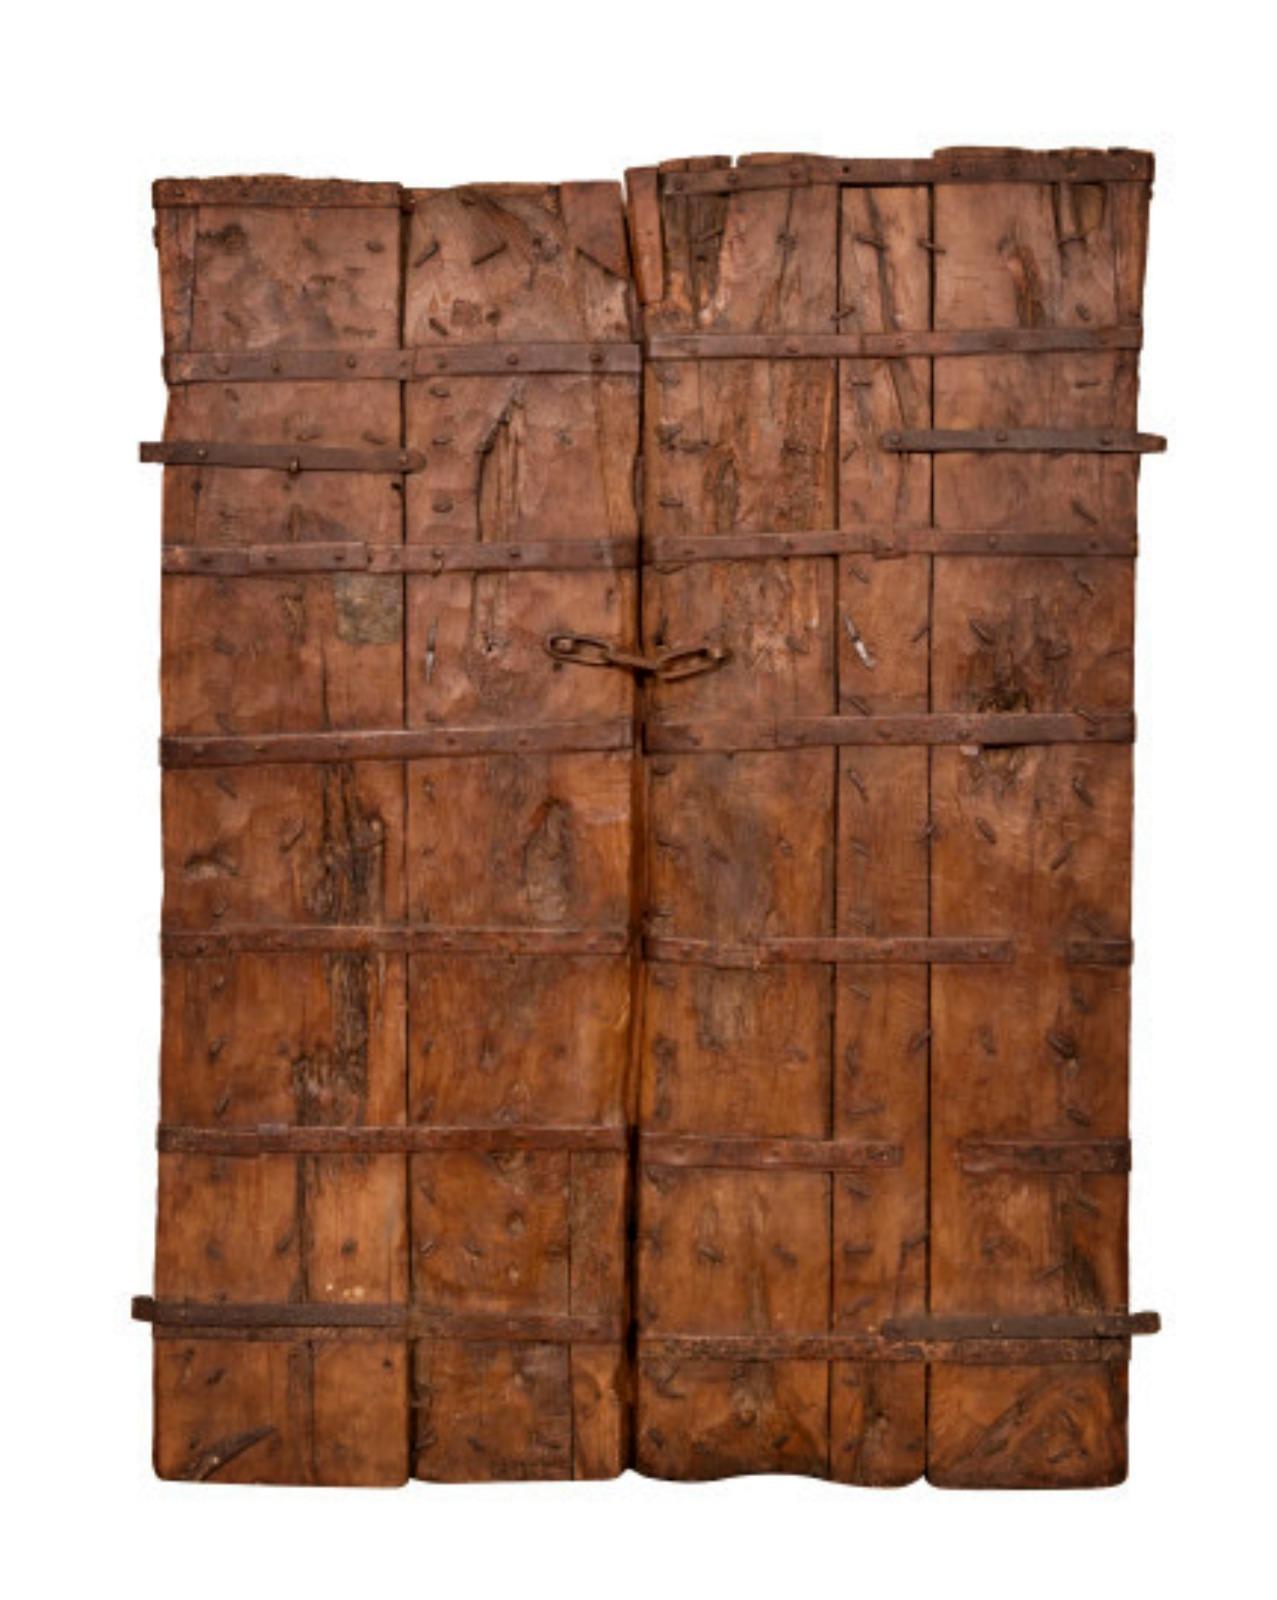 Hand-Crafted Amazing Italian Solid Wood and Iron Door, 17th Century